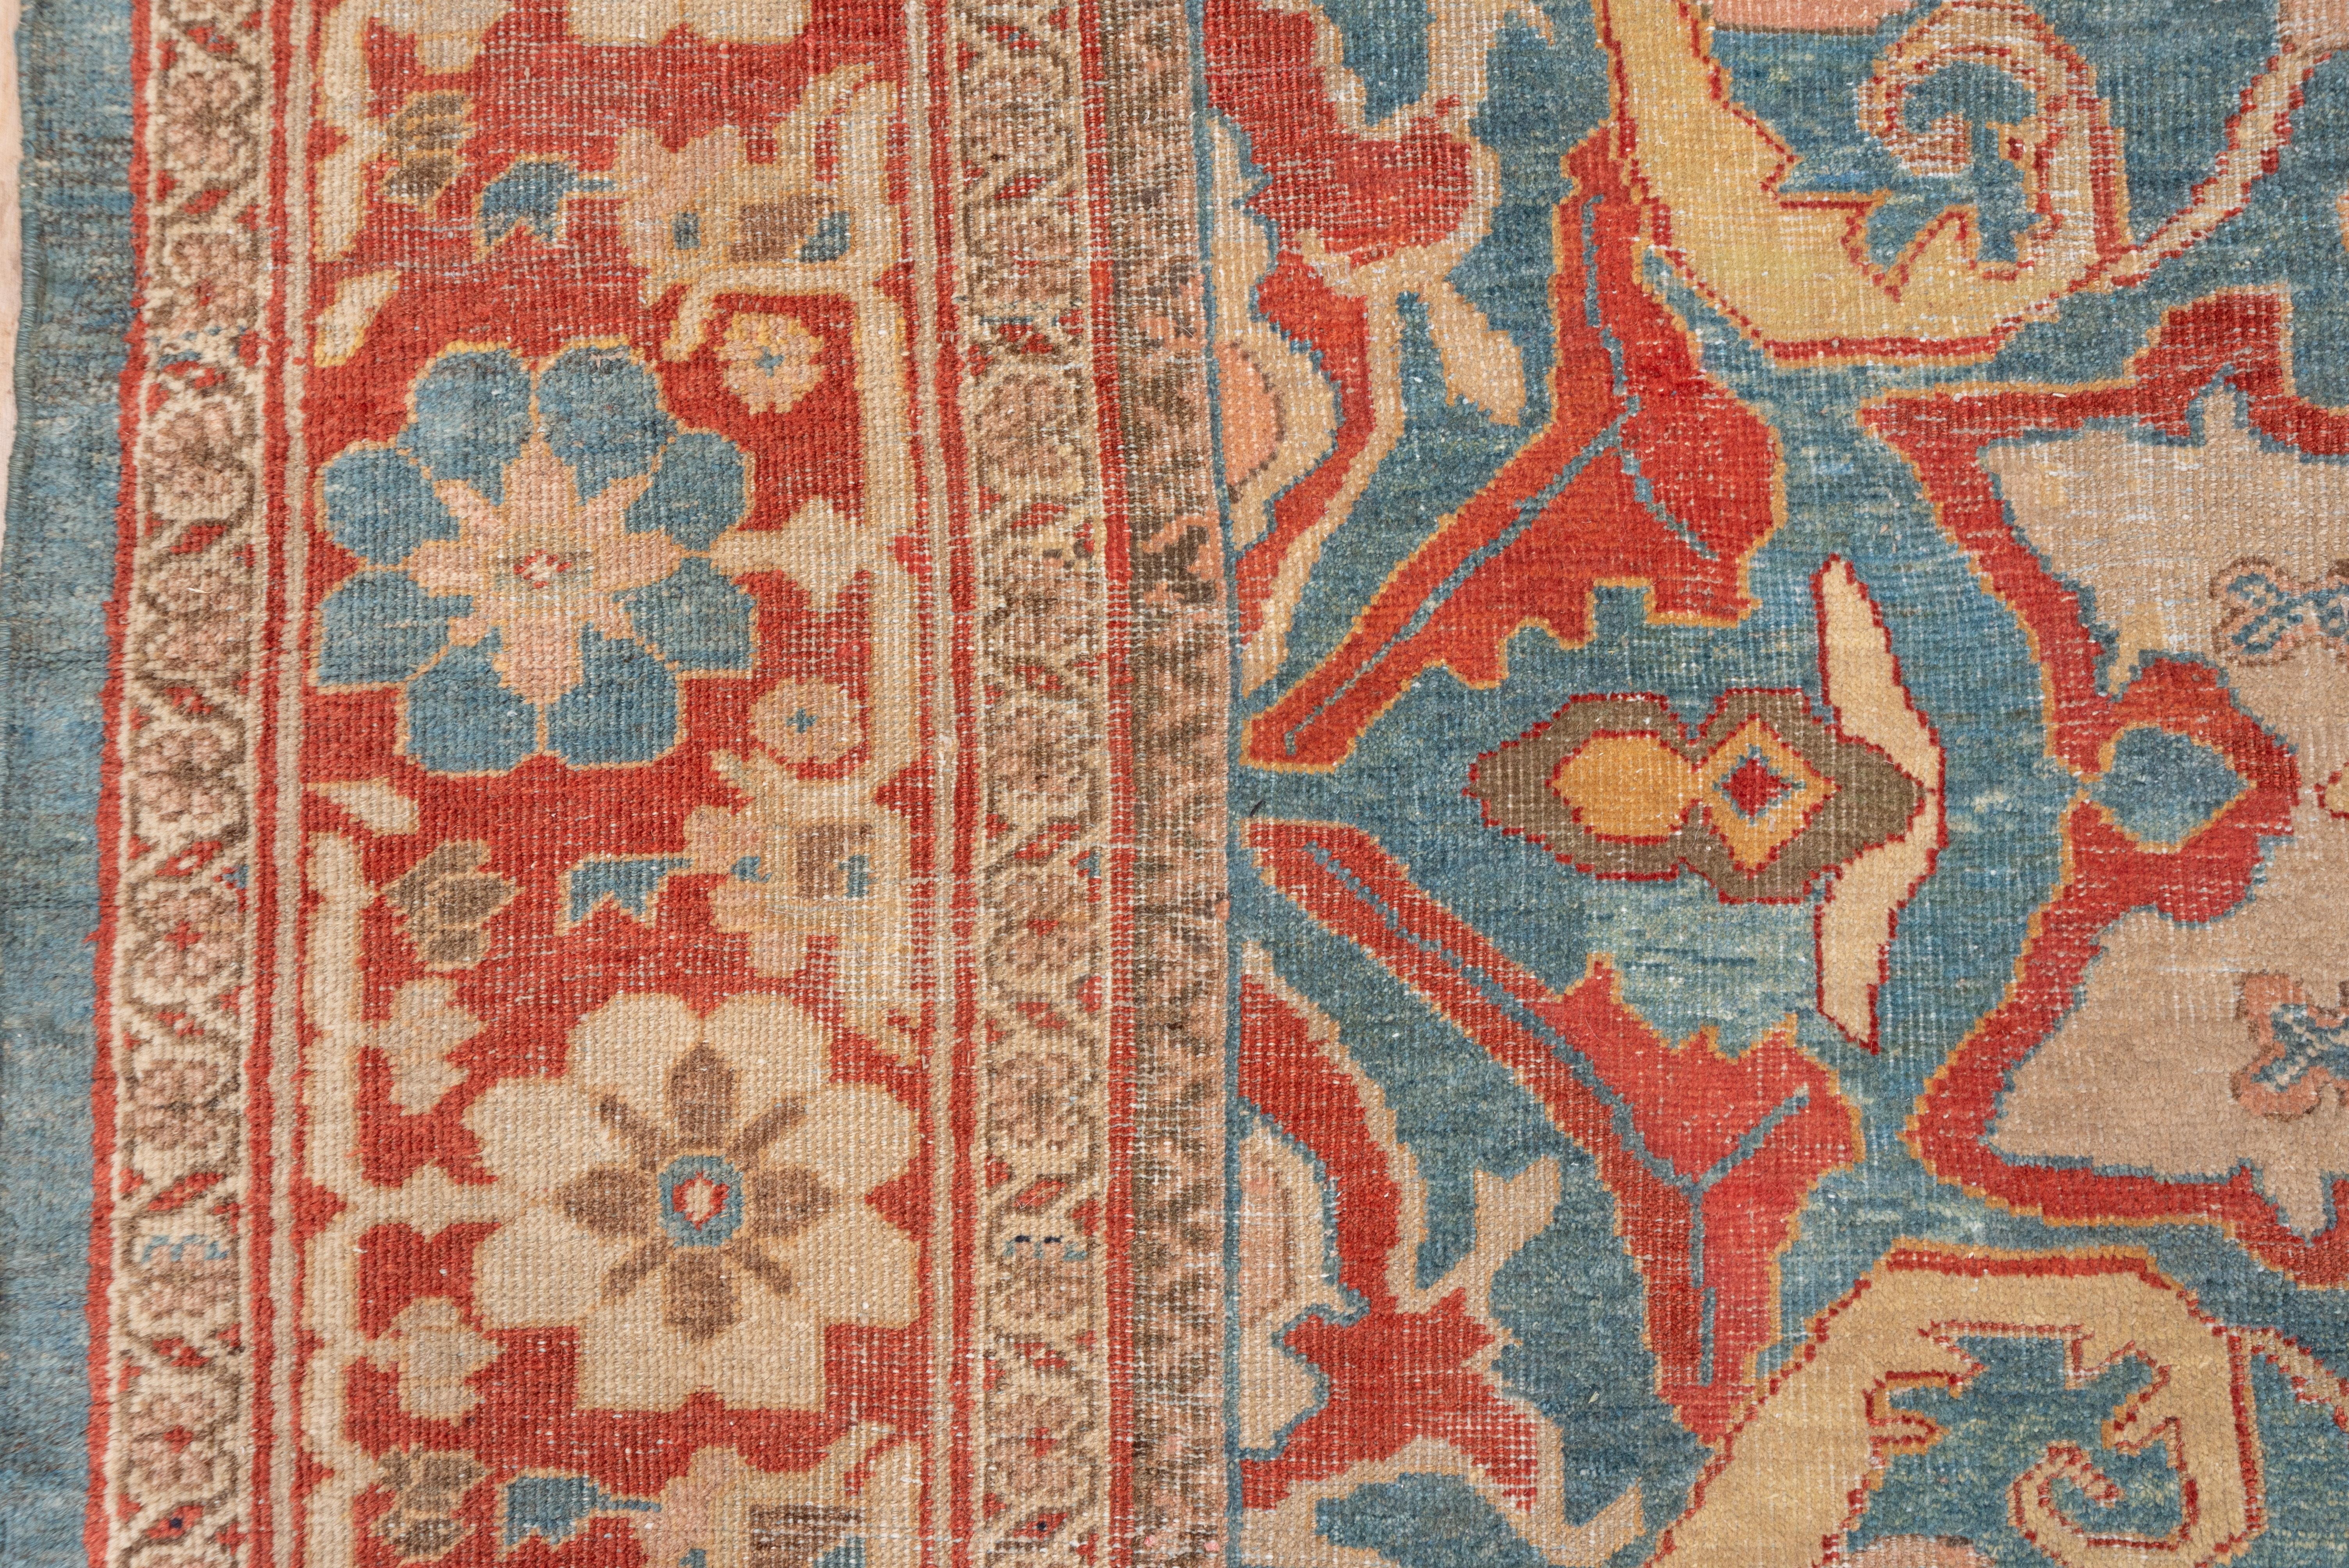 The rare sky blue field of this west Persian rustic medium-weave piece shows two large ivory stars, four large petal rust palmettes, vertical slender cartouches and bold lancet leaves. Rust border of lobed lollipop flowers. Good condition for the